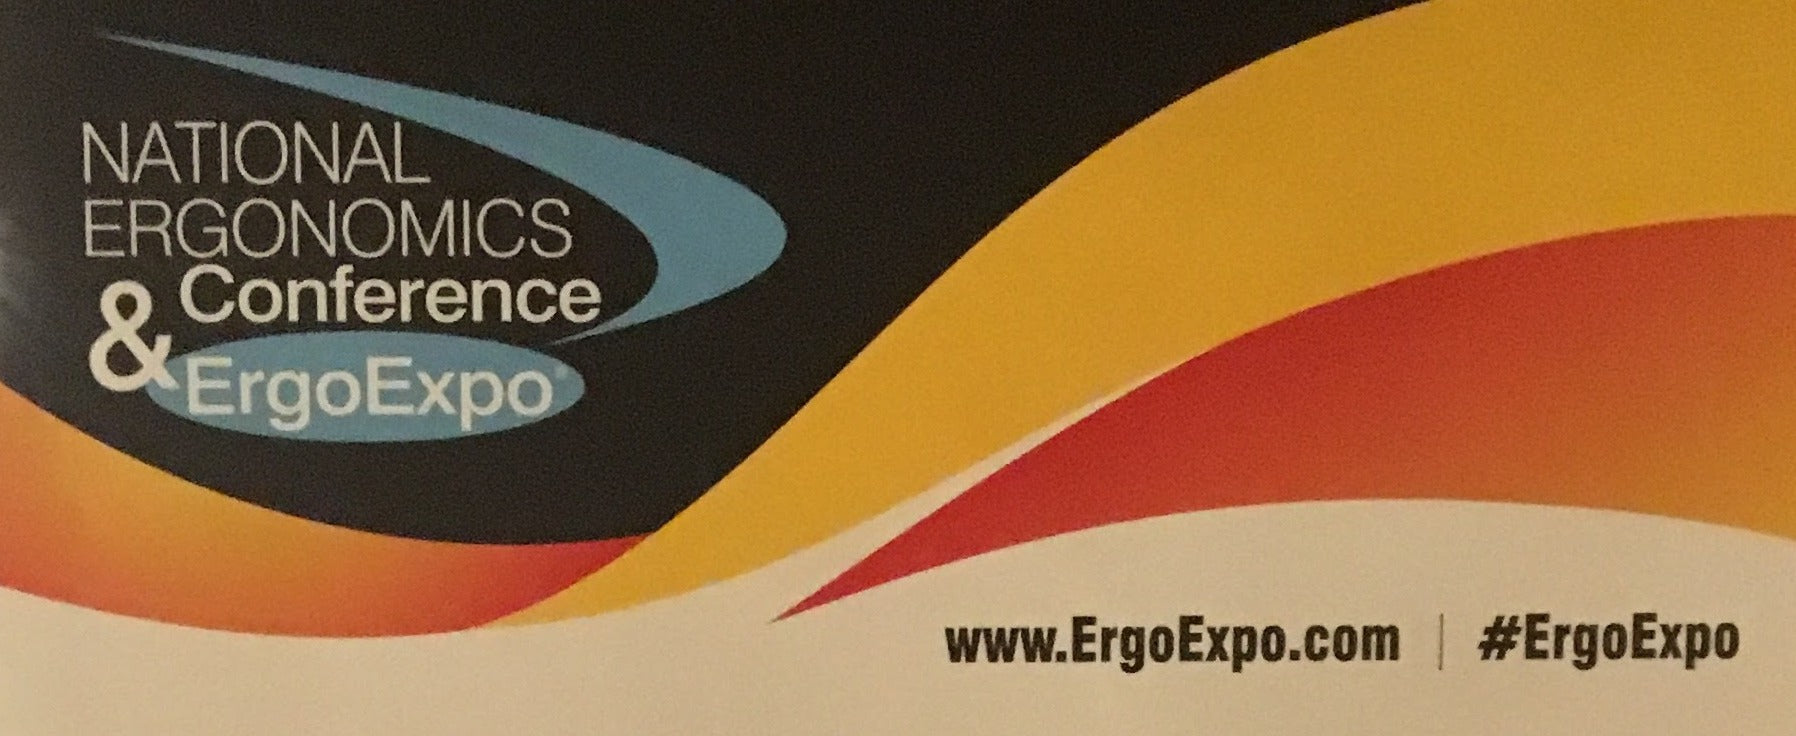 ErgoExpo 2018 - A Personal View